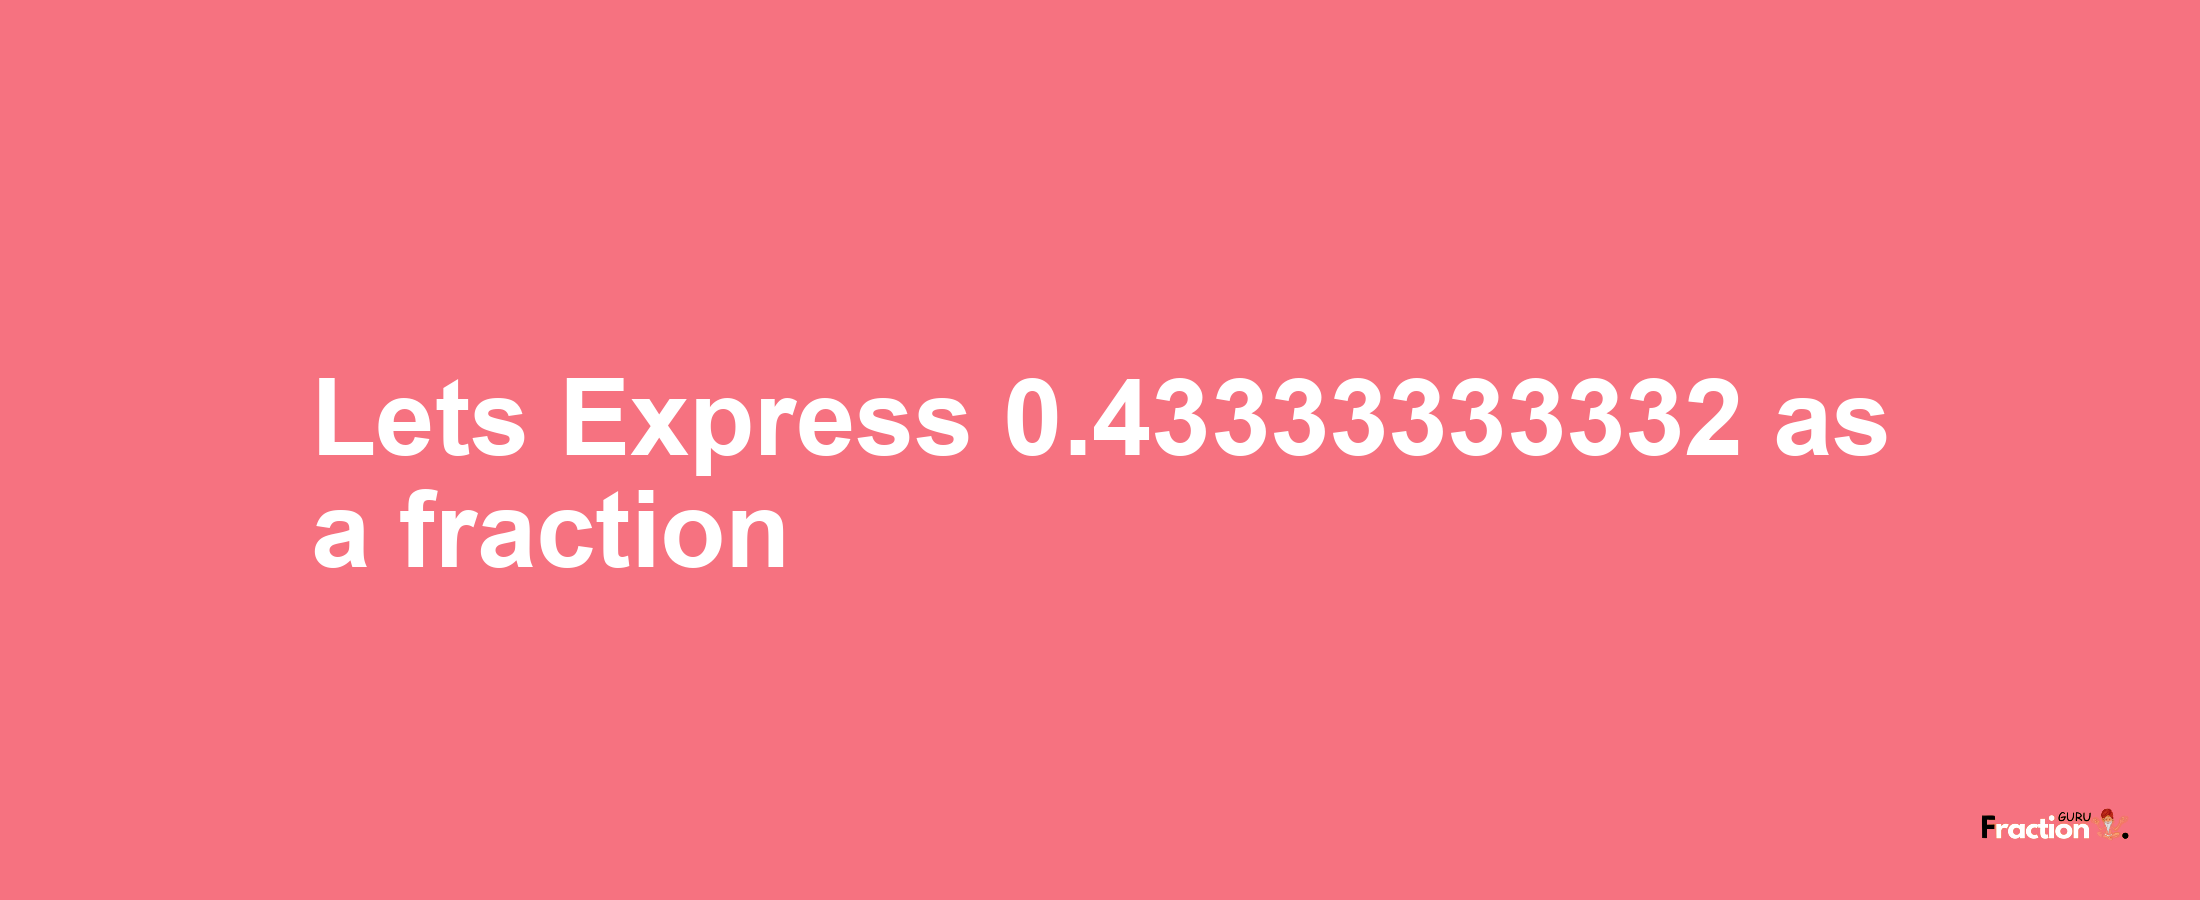 Lets Express 0.43333333332 as afraction